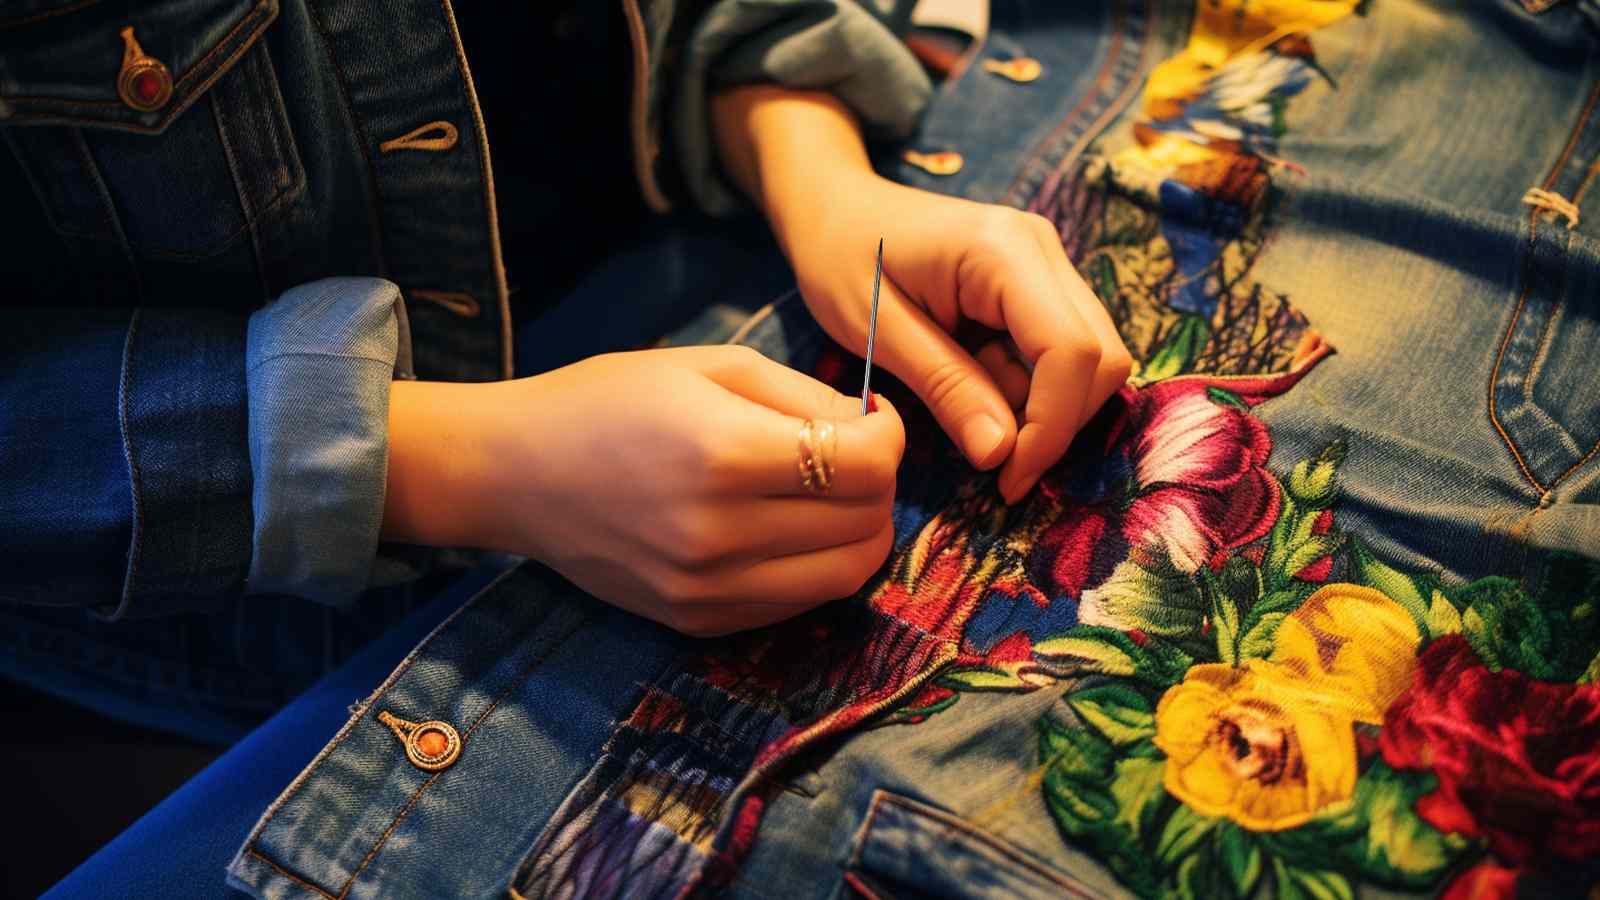 A woman is putting flowers on a denim jacket.